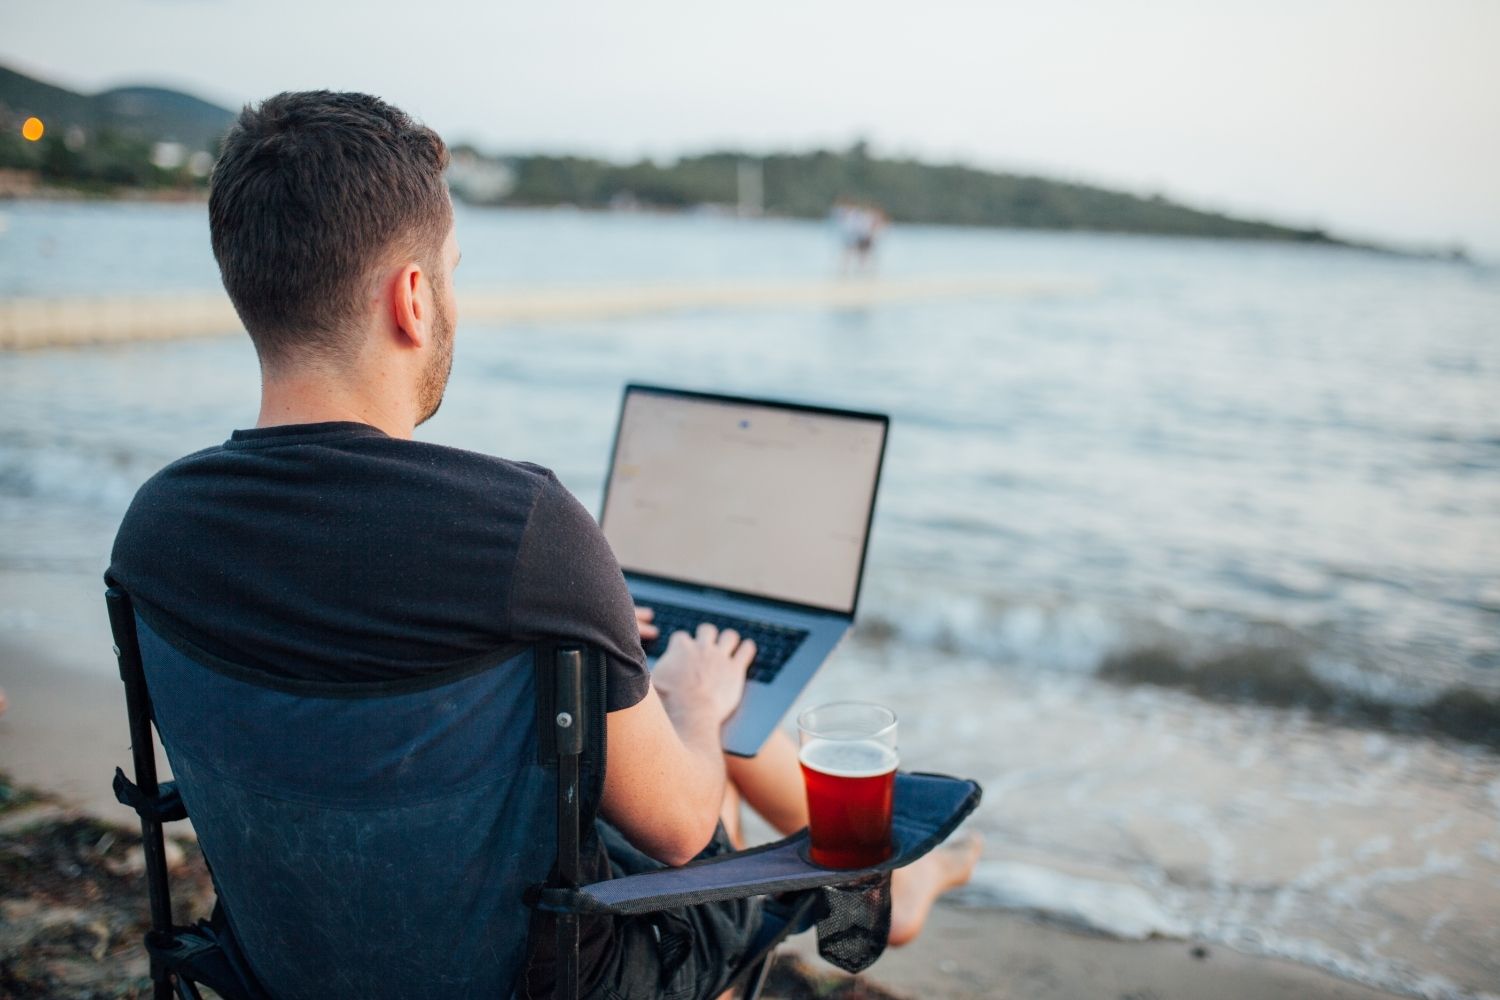 How To Start Working Remotely Even If You Don't Have Any Experience 36